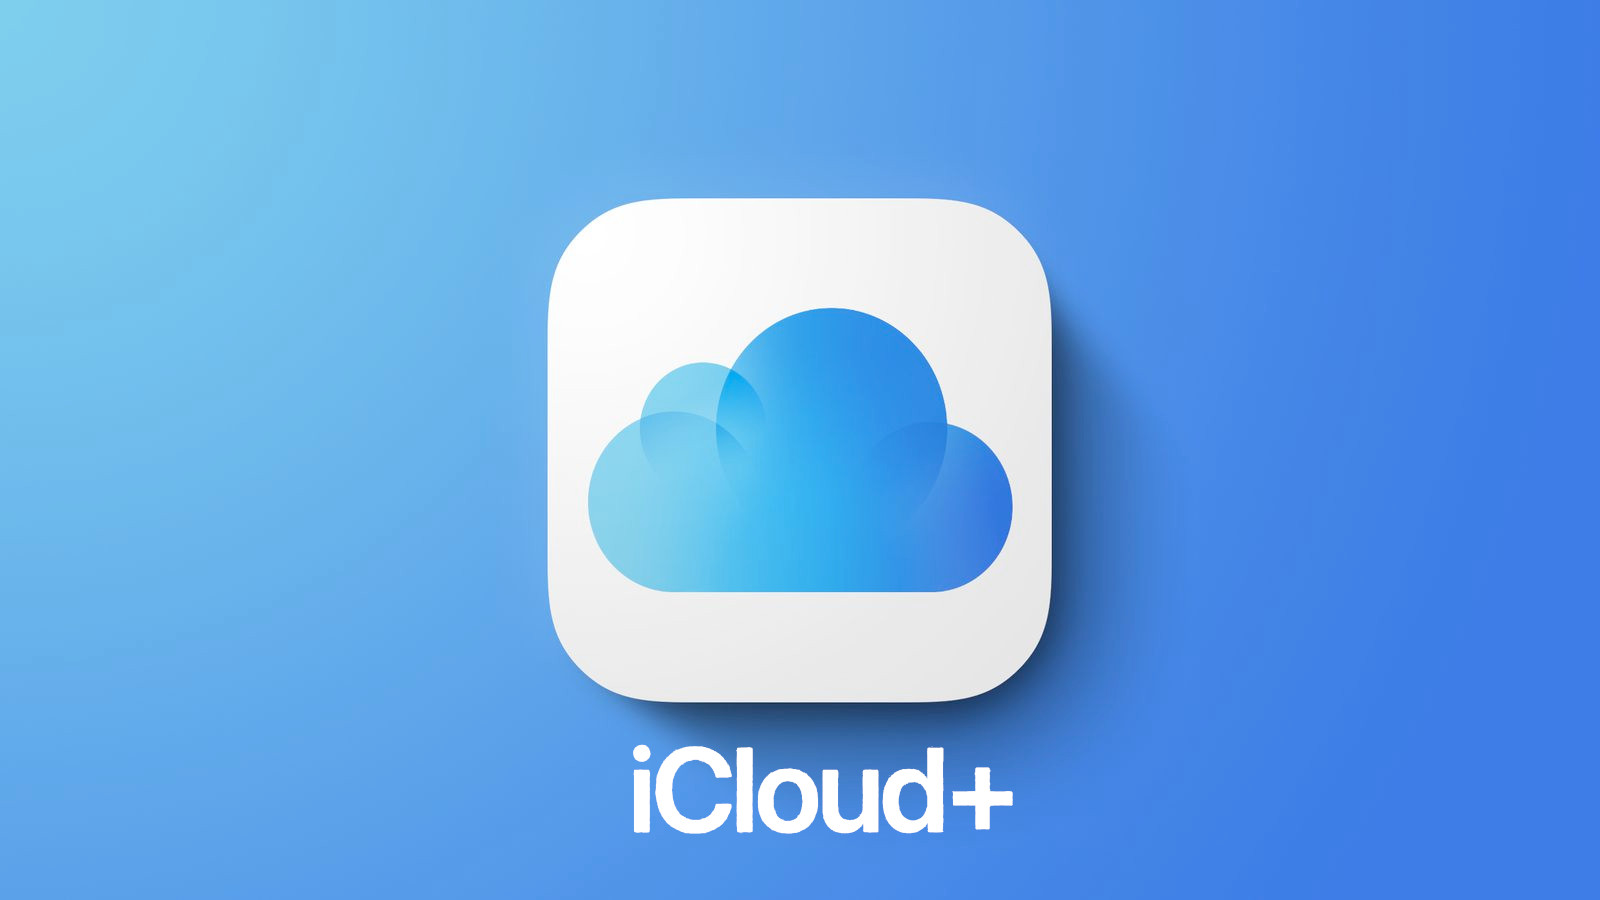 iCloud+ 50GB - 3 Months Trial Subscription US (ONLY FOR NEW ACCOUNTS) (0.31$)